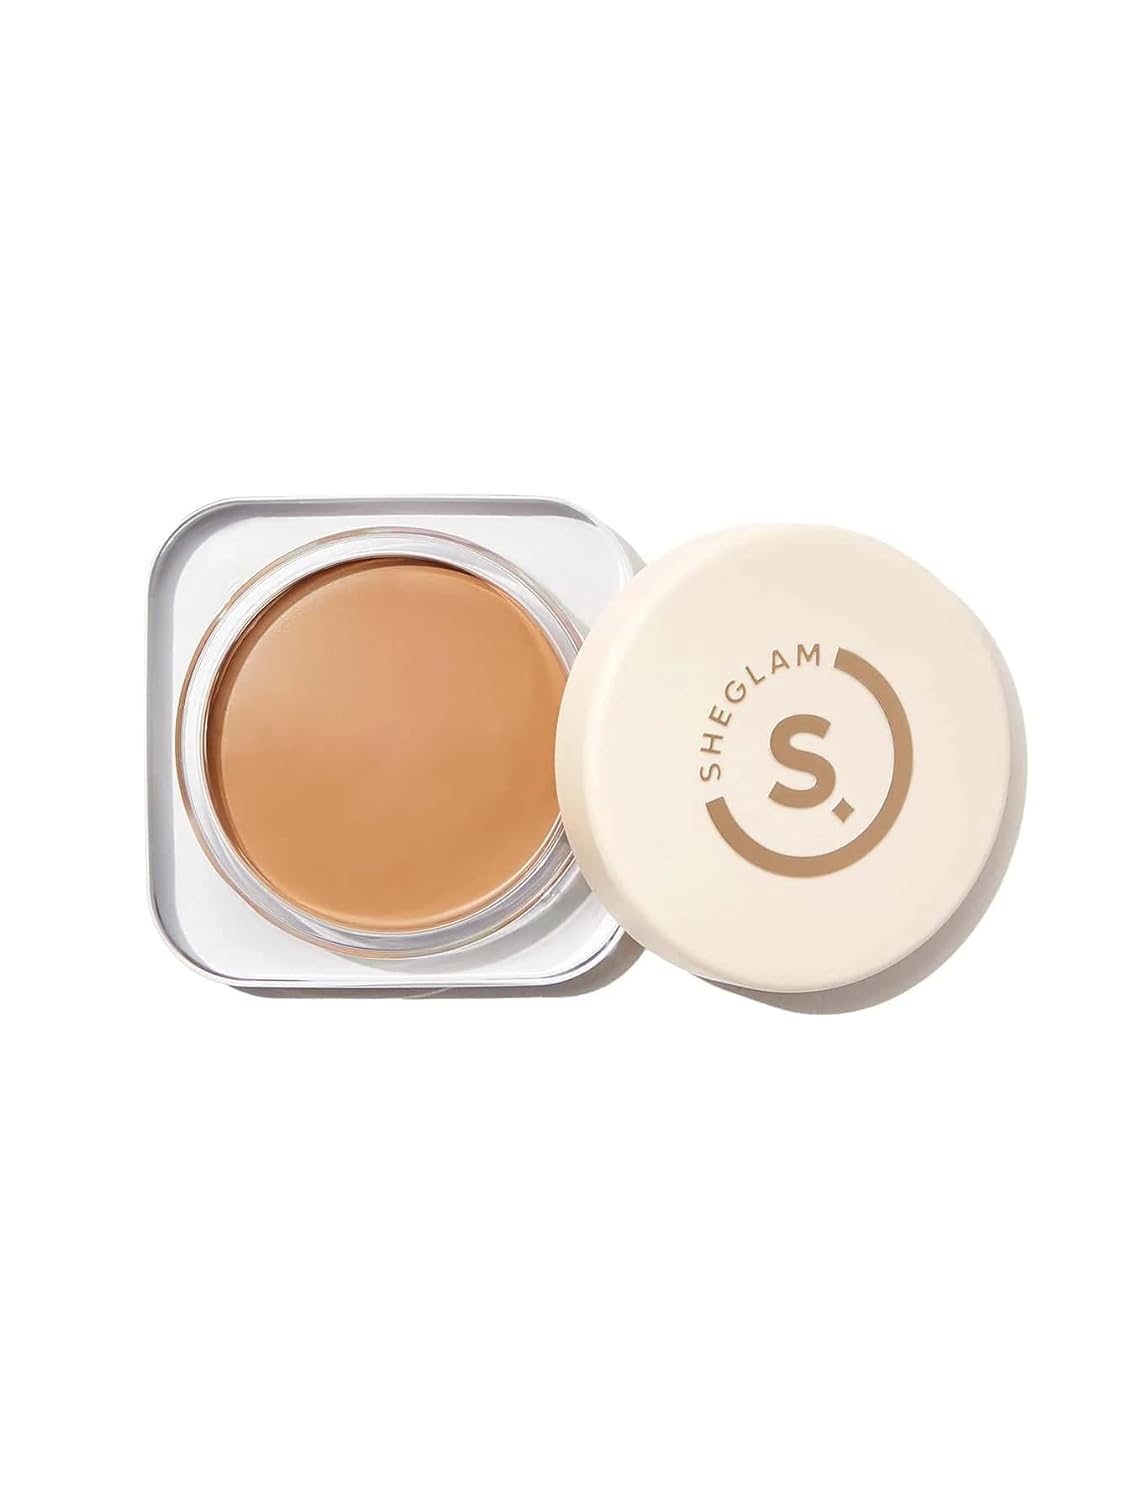 SHEGLAM Hydrating Cream Full Coverage Foundation Balm Long Lasting Concealer Face Foundation for Dry Skin - Almond